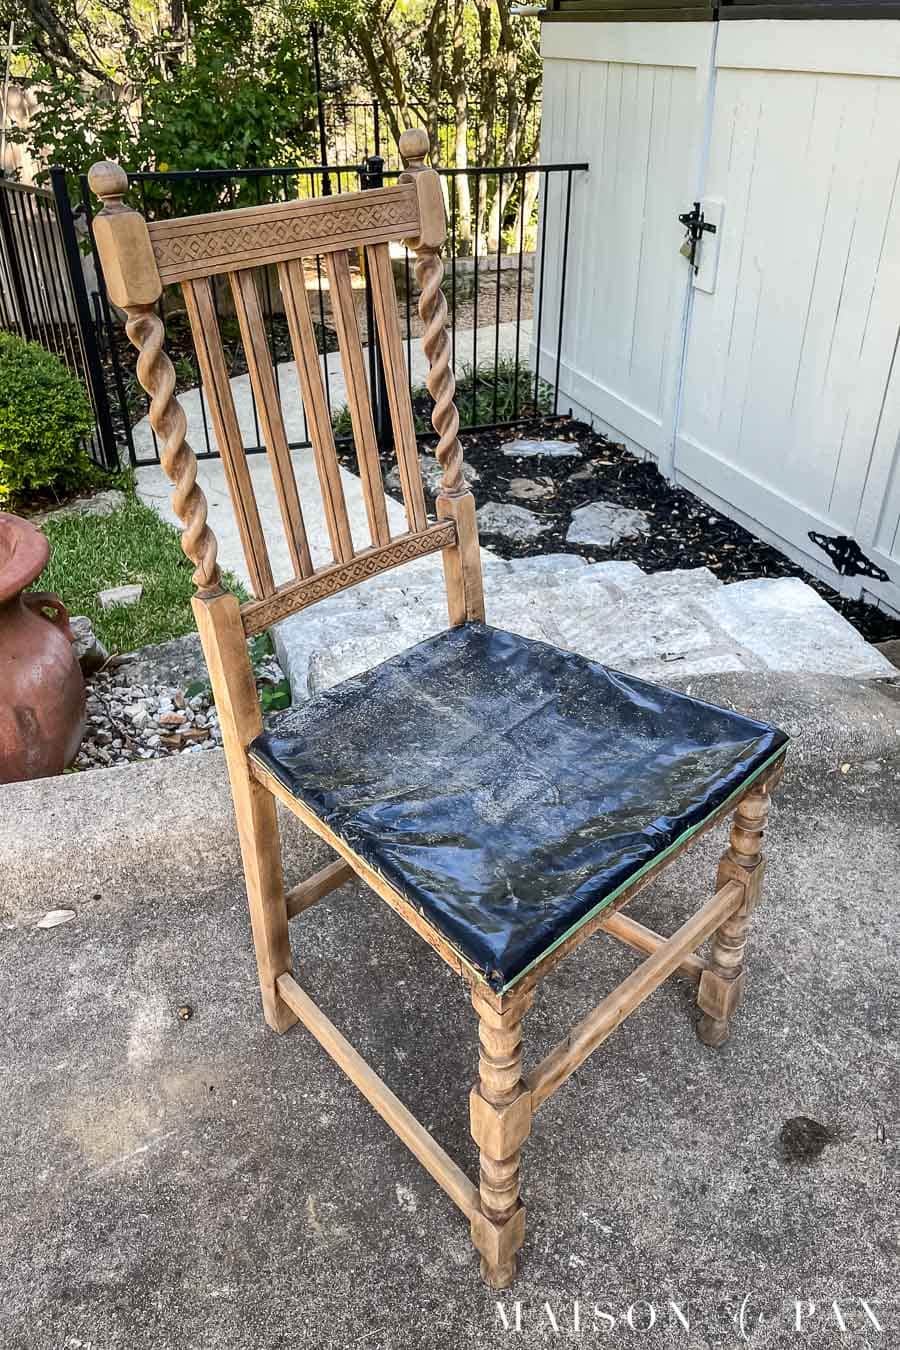 antique wood chair after stripping with oven cleaner